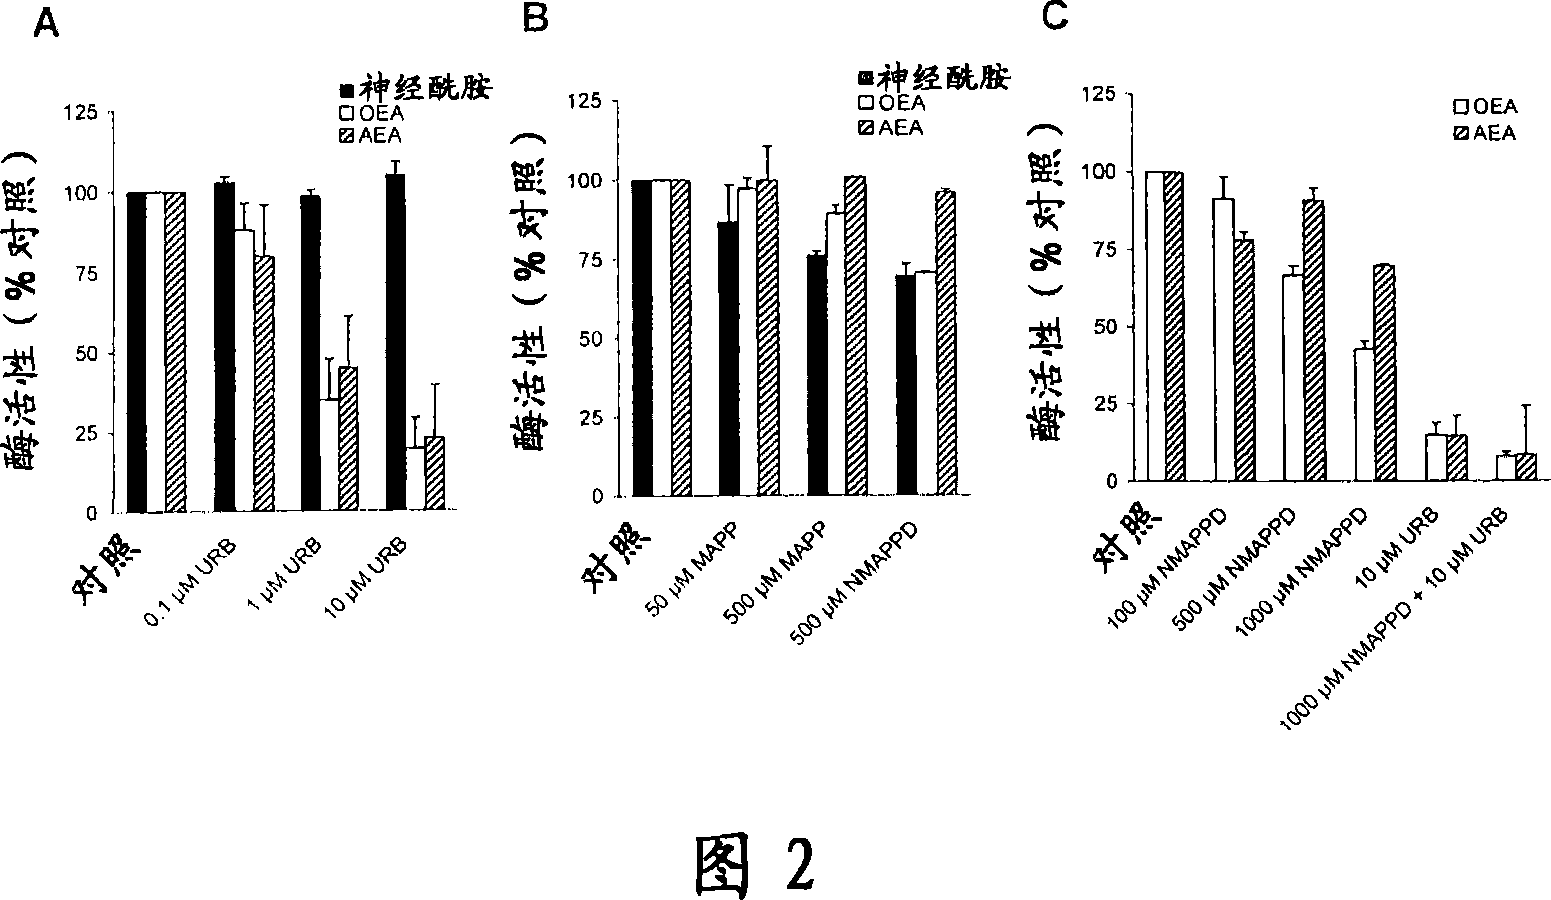 Inhibitors of anorexic lipid hydrolysis for the treatment of eating disorders